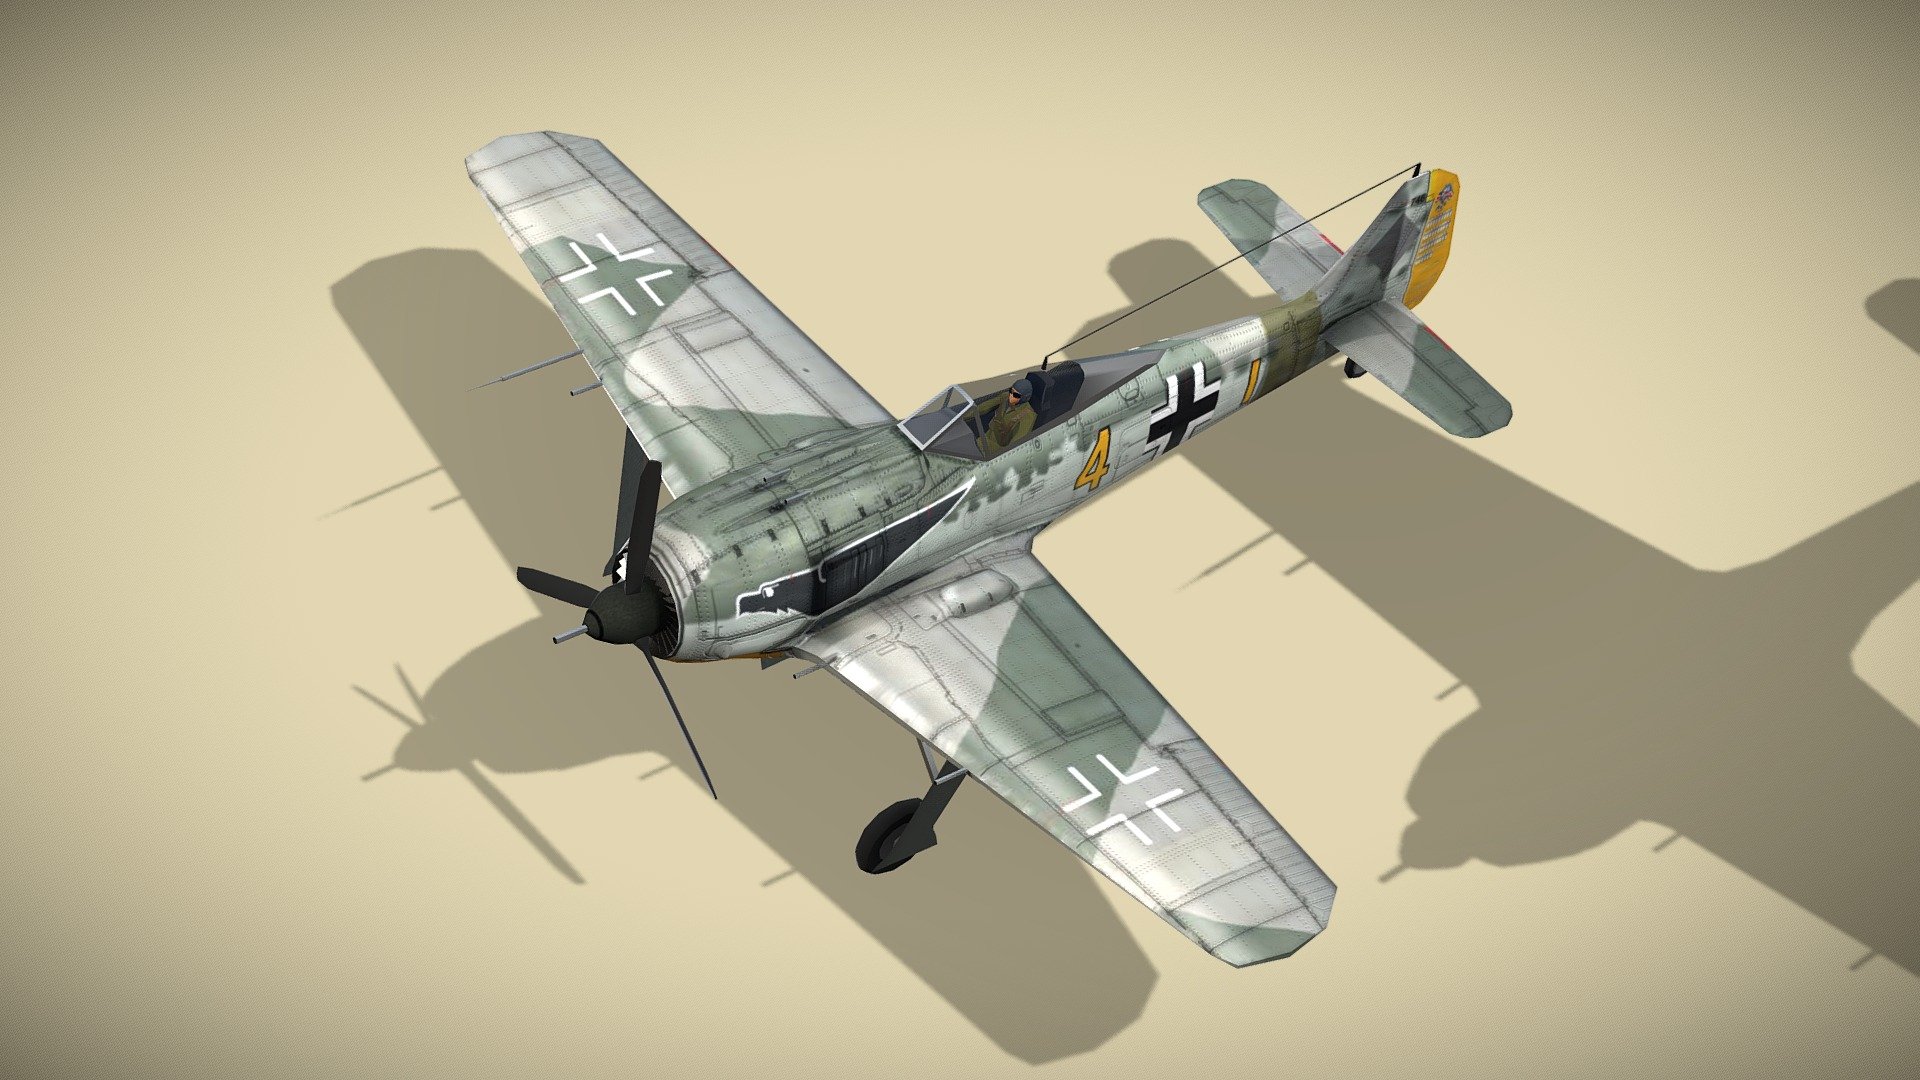 Focke-Wulf FW-190 Shrike

Lowpoly model of german fighter plane from WW2



Focke-Wulf Fw 190 is a German single-seat, single-engine fighter aircraft designed by Kurt Tank at Focke-Wulf in the late 1930s and widely used during World War II. Along with its well-known counterpart, the Messerschmitt Bf 109, the Fw 190 became the backbone of the Jagdwaffe (Fighter Force) of the Luftwaffe. The twin-row BMW 801 radial engine that powered most operational versions enabled the Fw 190 to lift larger loads than the Bf 109, allowing its use as a day fighter, fighter-bomber, ground-attack aircraft and to a lesser degree, night fighter.



1 standing version with wheels and 2 flying versions with trails, afterburner, pilot and armament.

Model has bump map, roughness map and 3 x diffuse textures.



Check also my other aircrafts and cars.

Patreon with monthly free model - Focke-Wulf FW-190 Shrike - Buy Royalty Free 3D model by NETRUNNER_pl 3d model